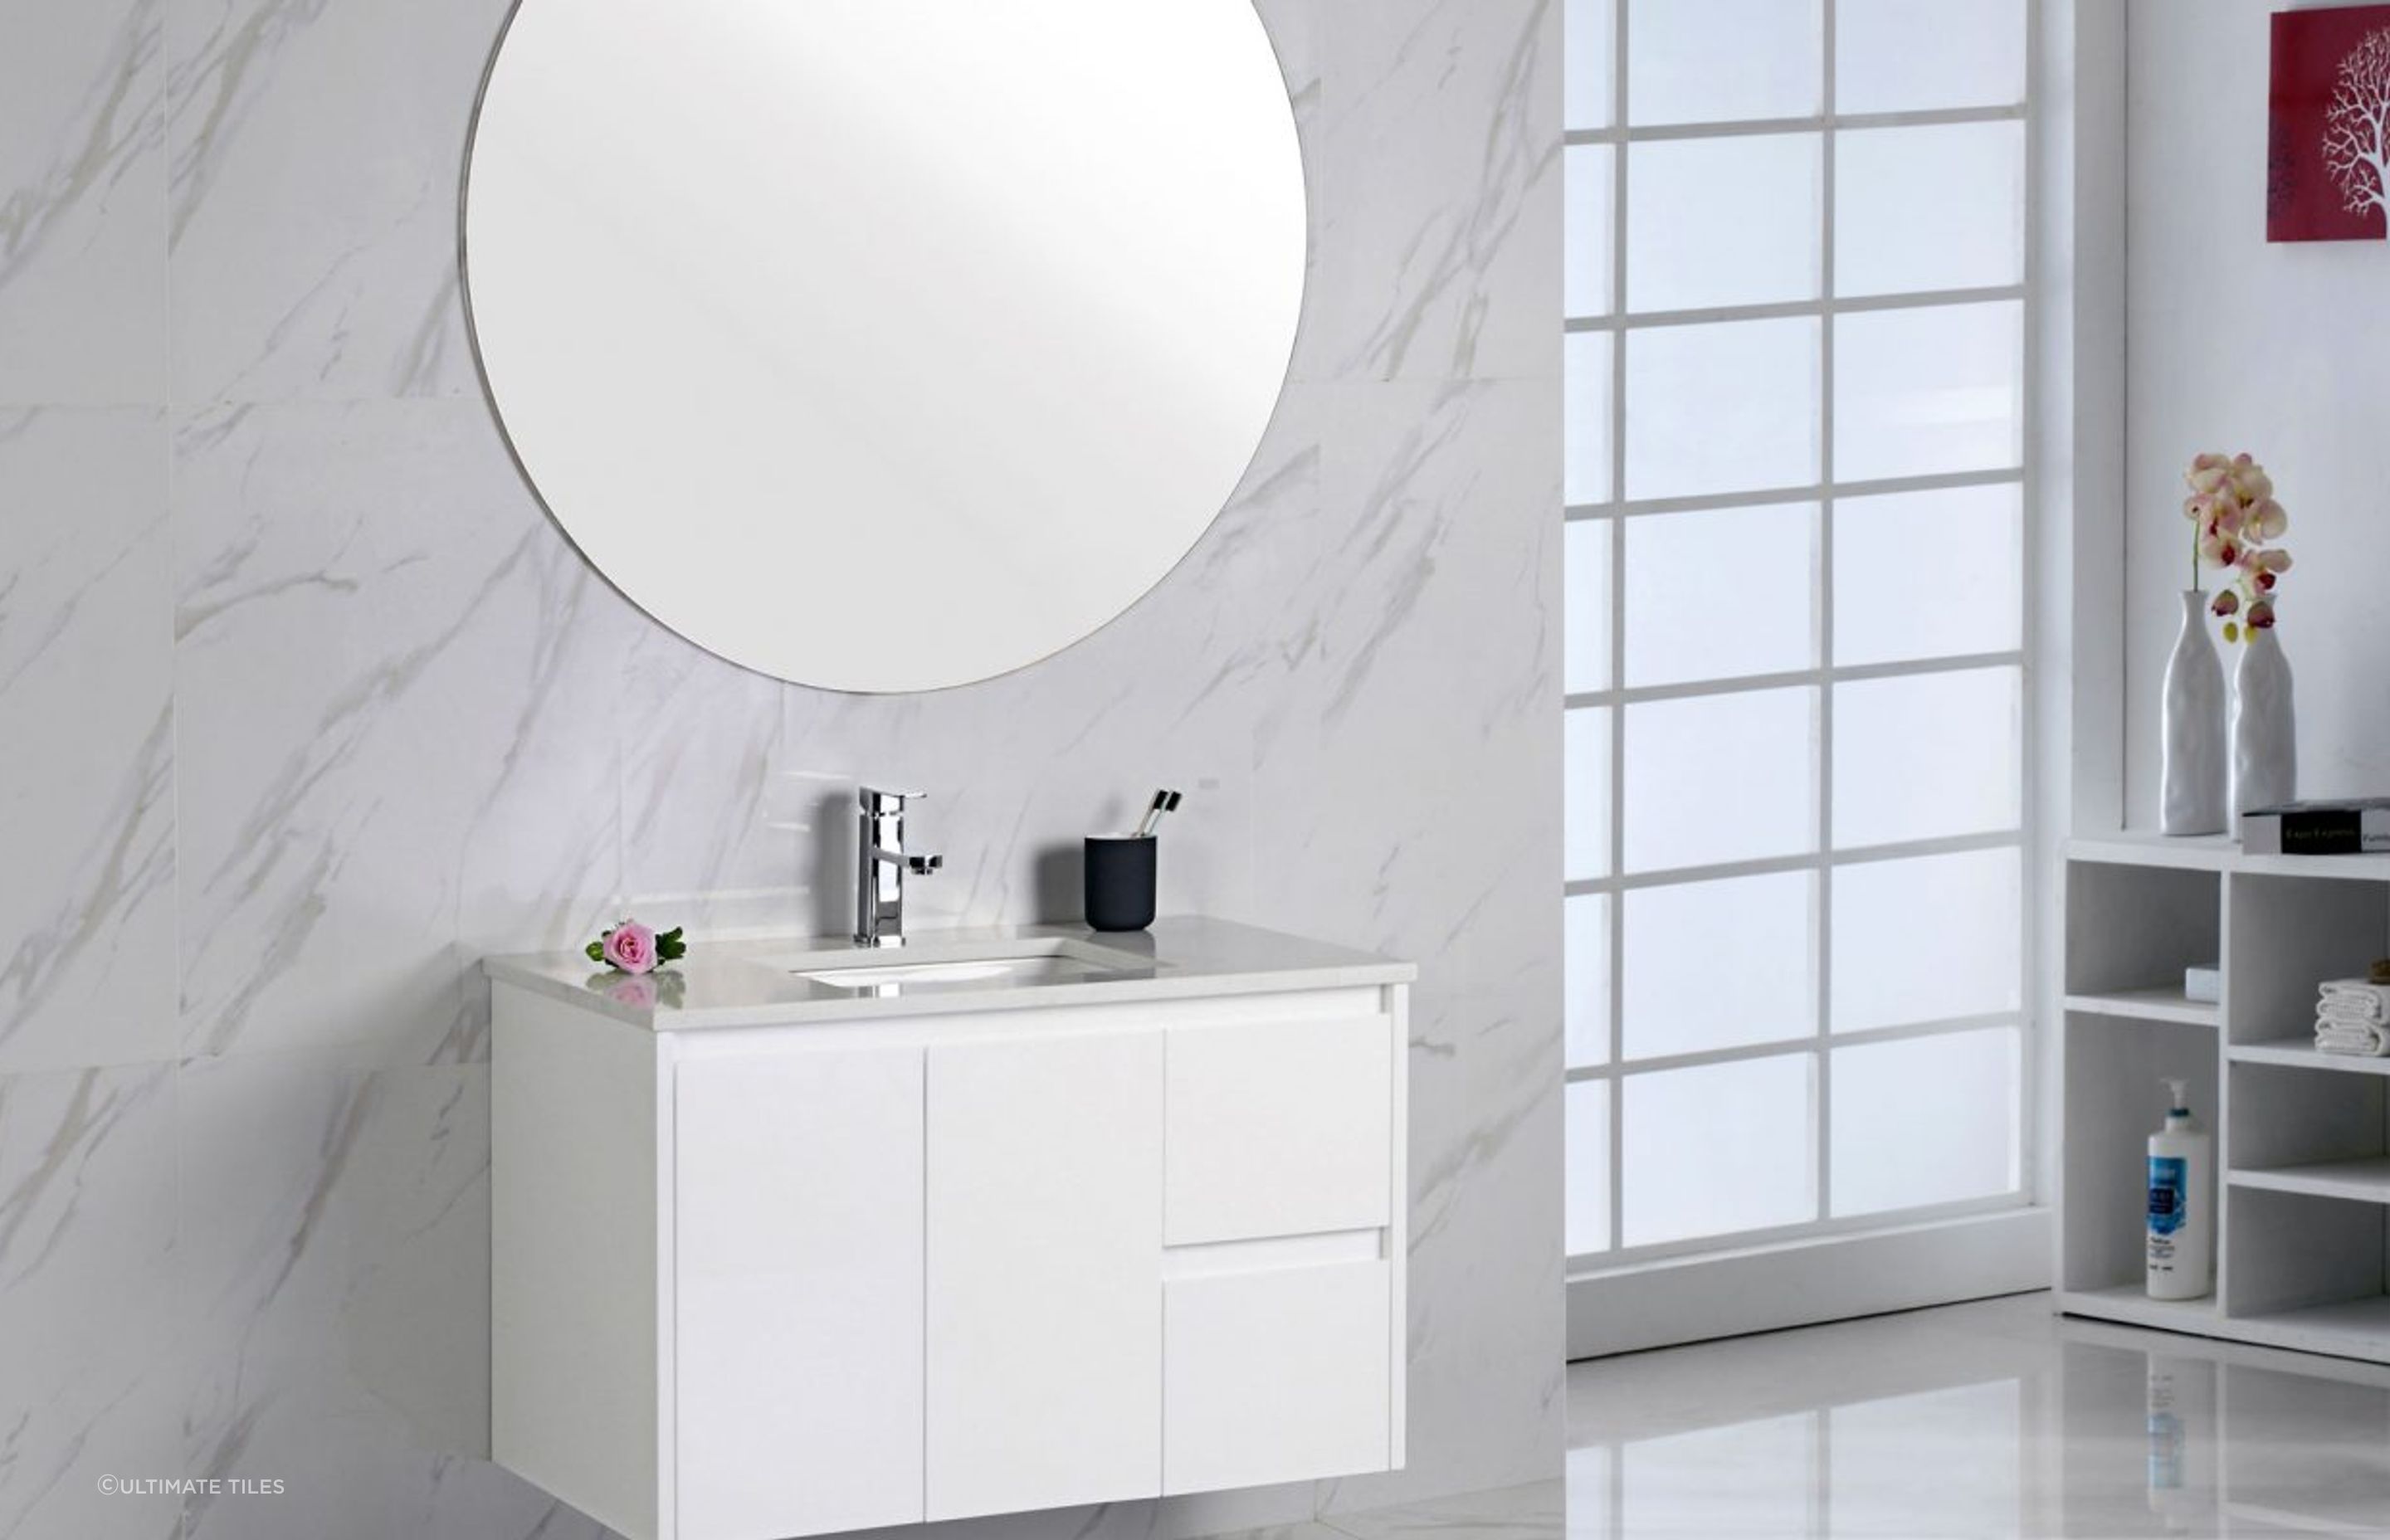 The Alice vanity - an excellent example of a floating vanity from Ultimate Tiles